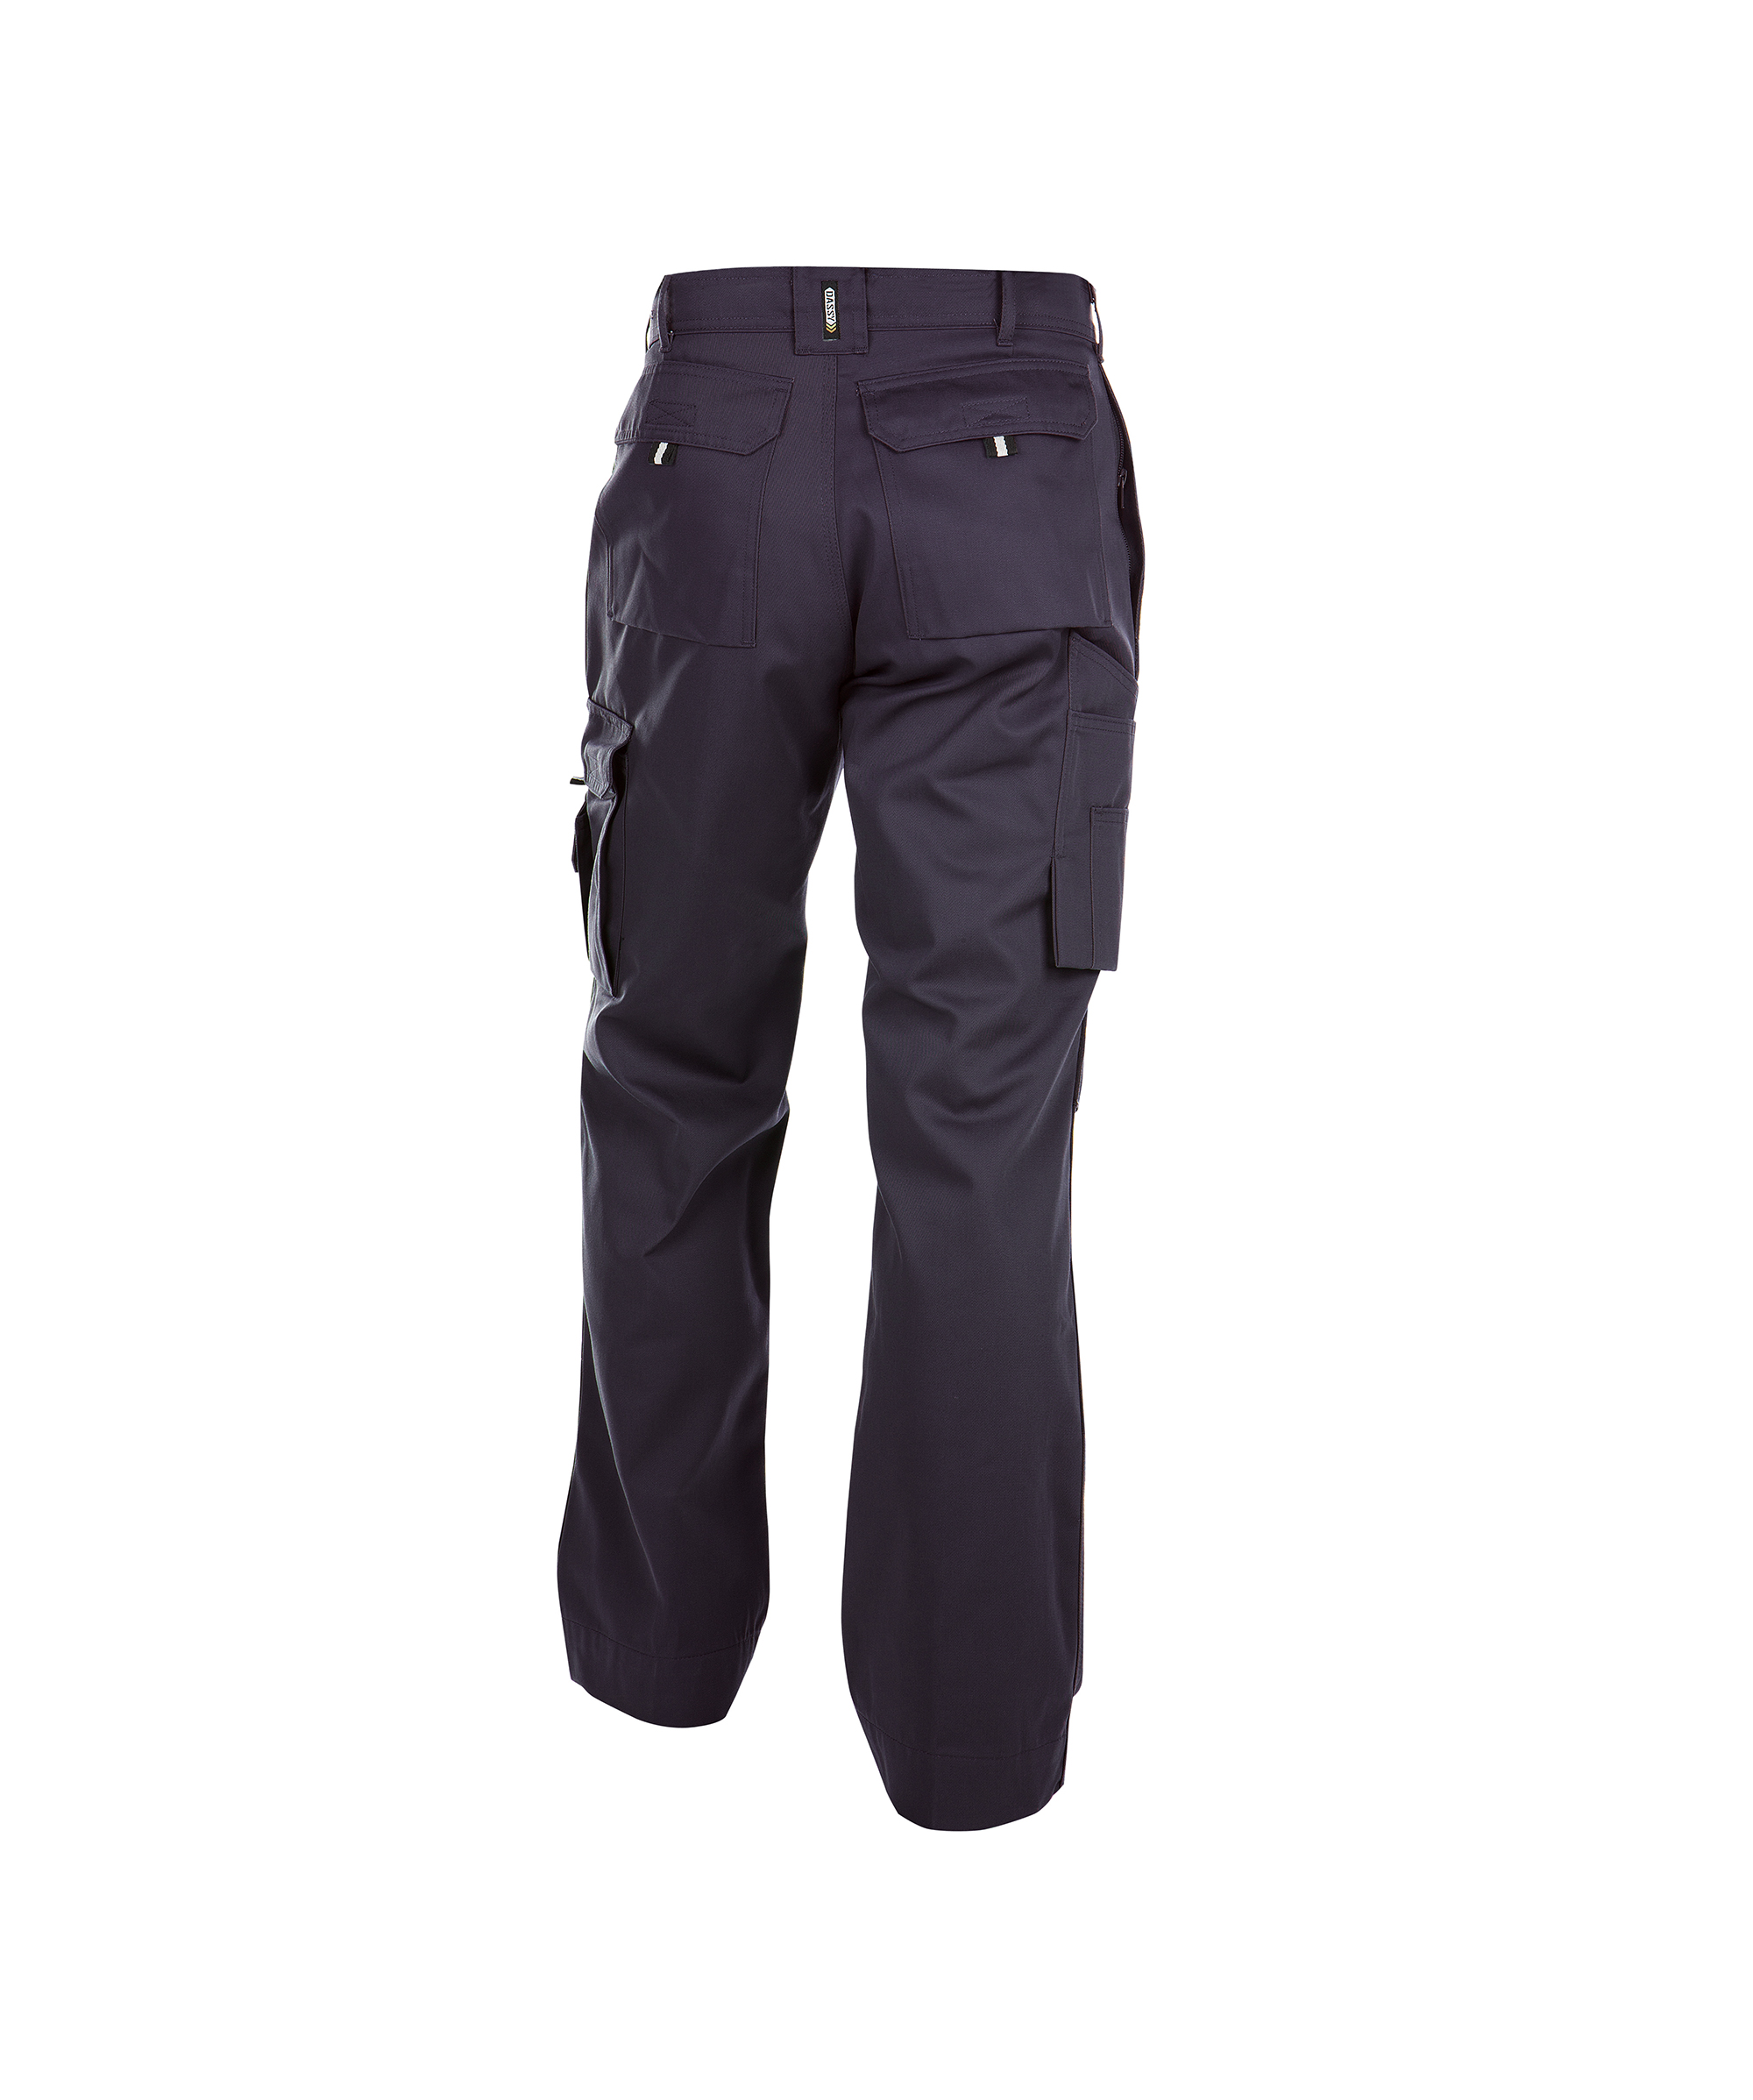 miami_work-trousers-with-knee-pockets_navy_back.jpg